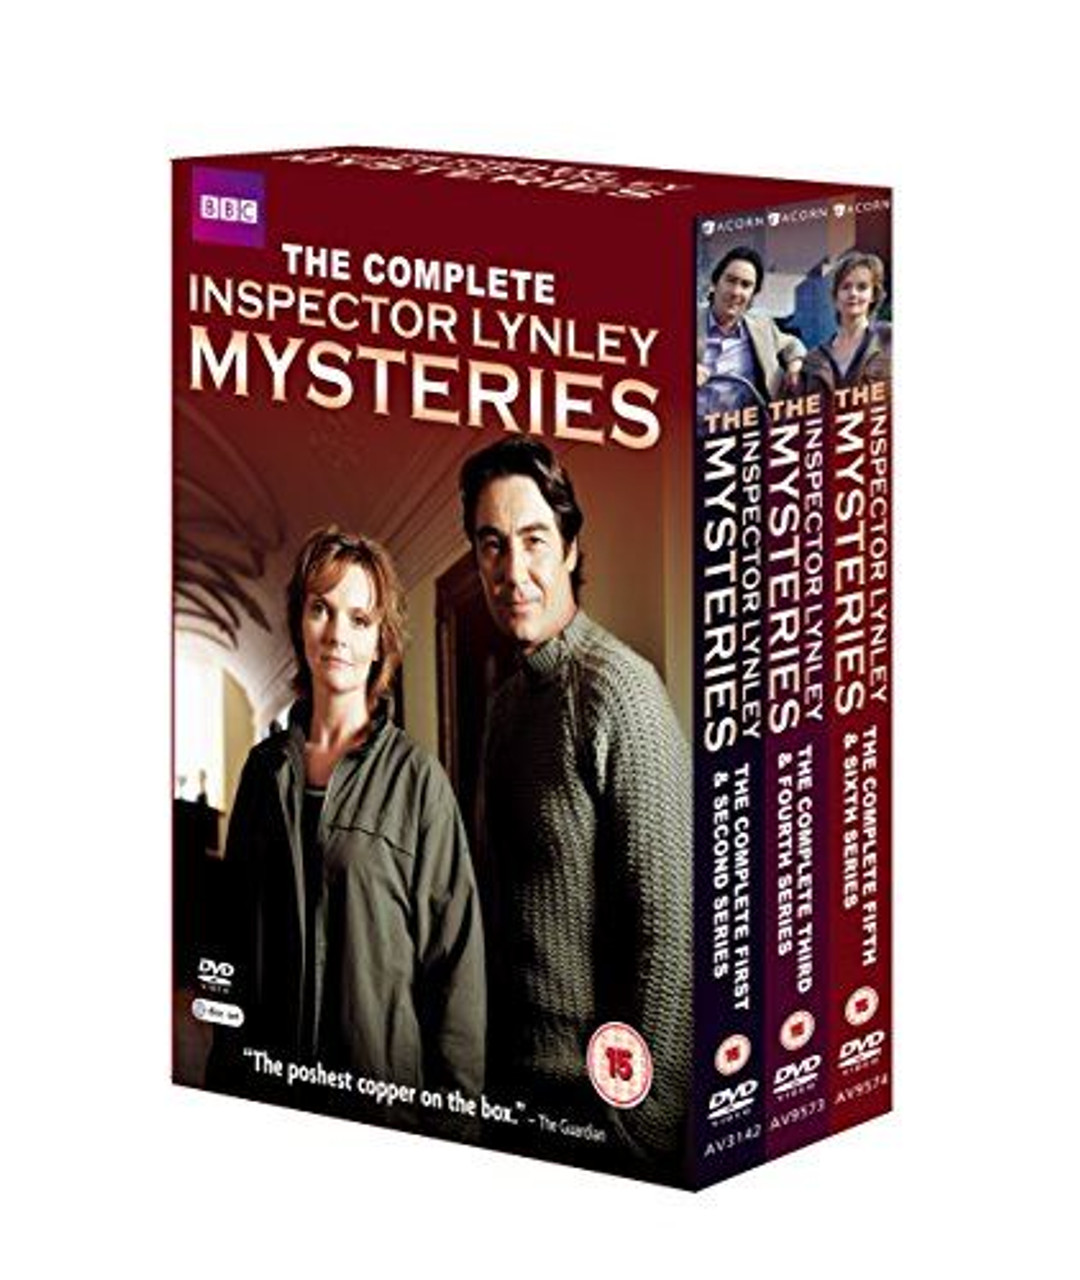 The Inspector Lynley Mysteries Complete 1-6 DVD